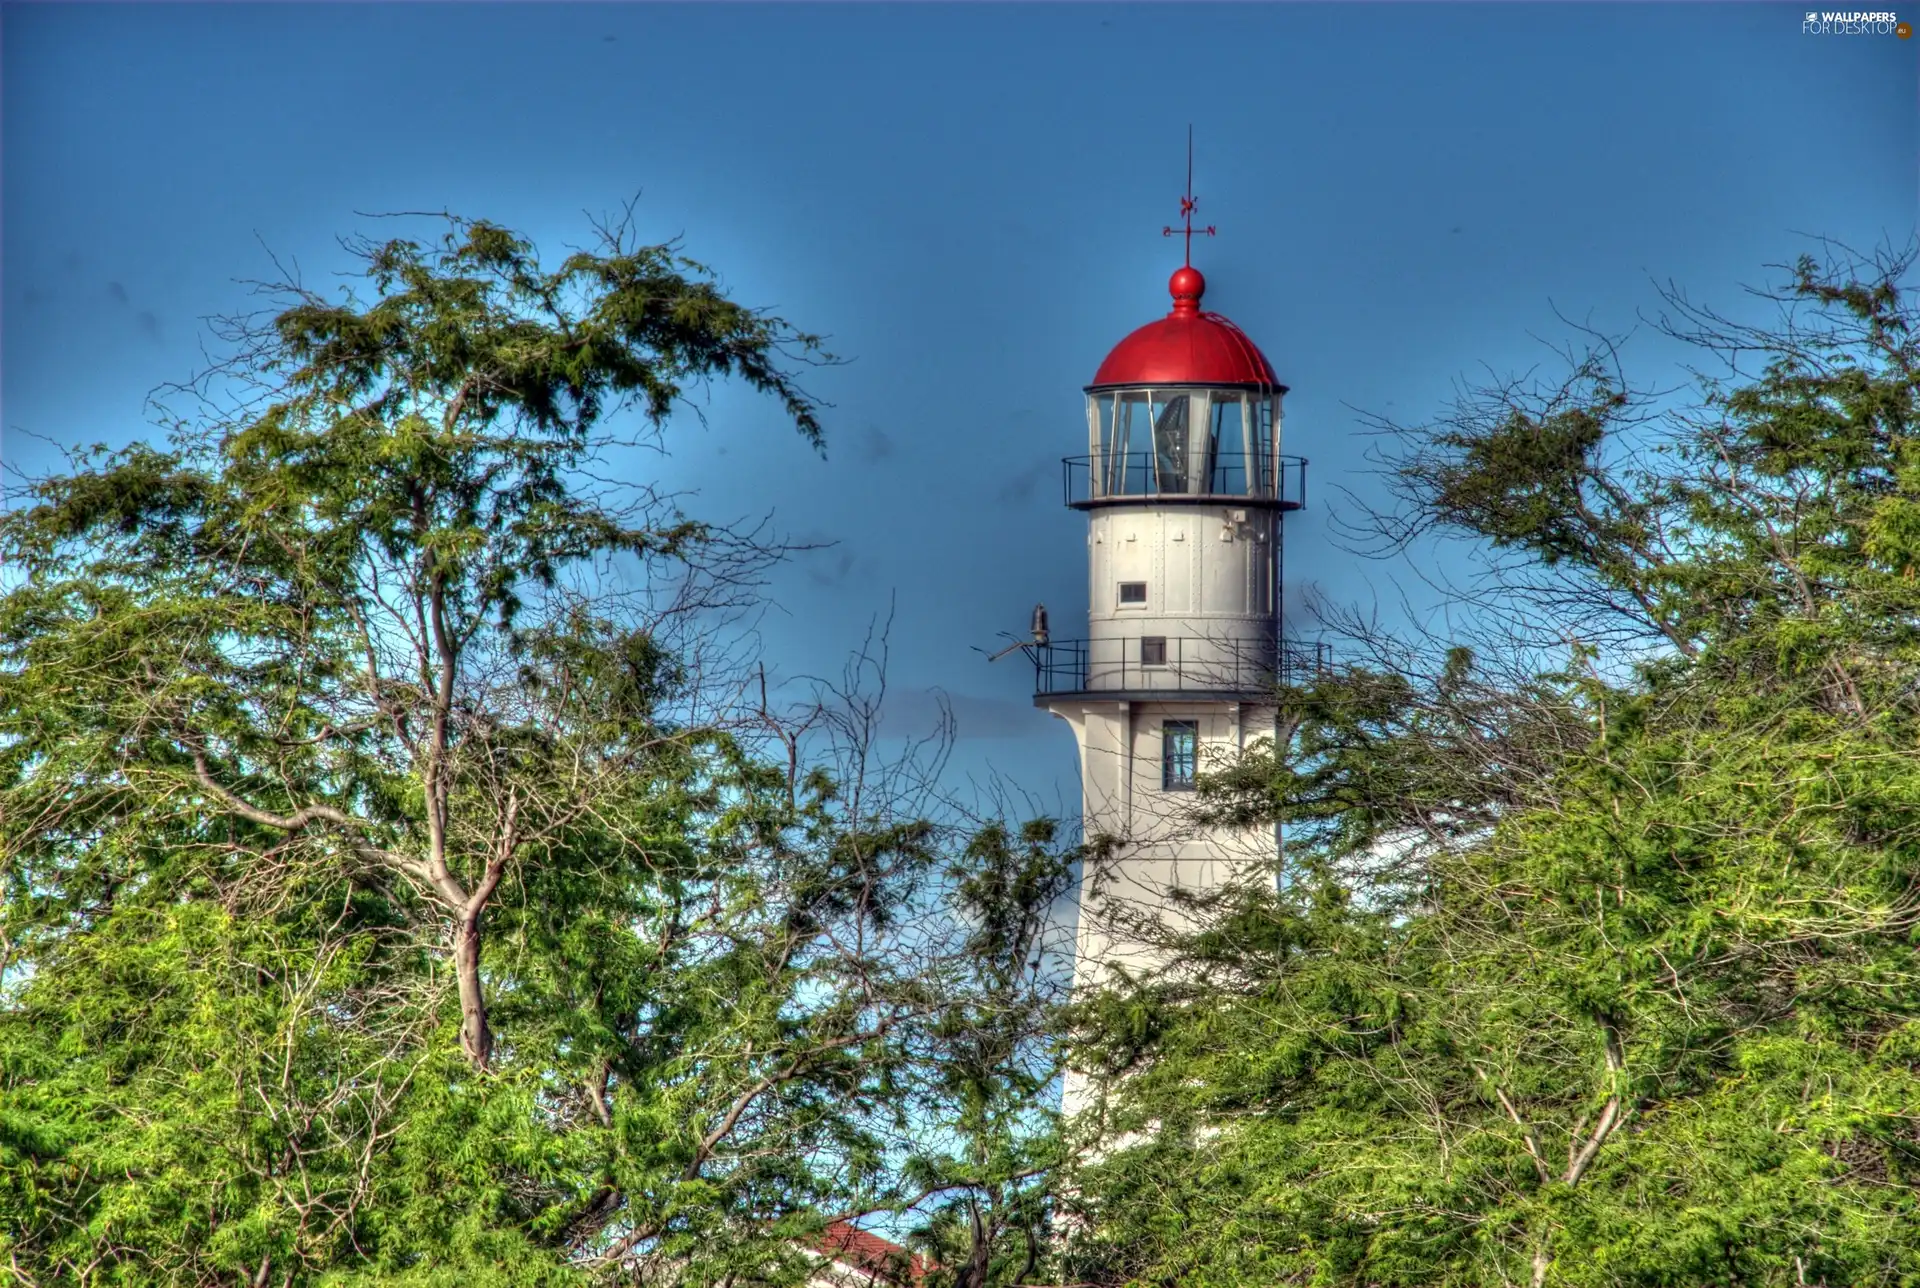 Lighthouse, trees, viewes, maritime